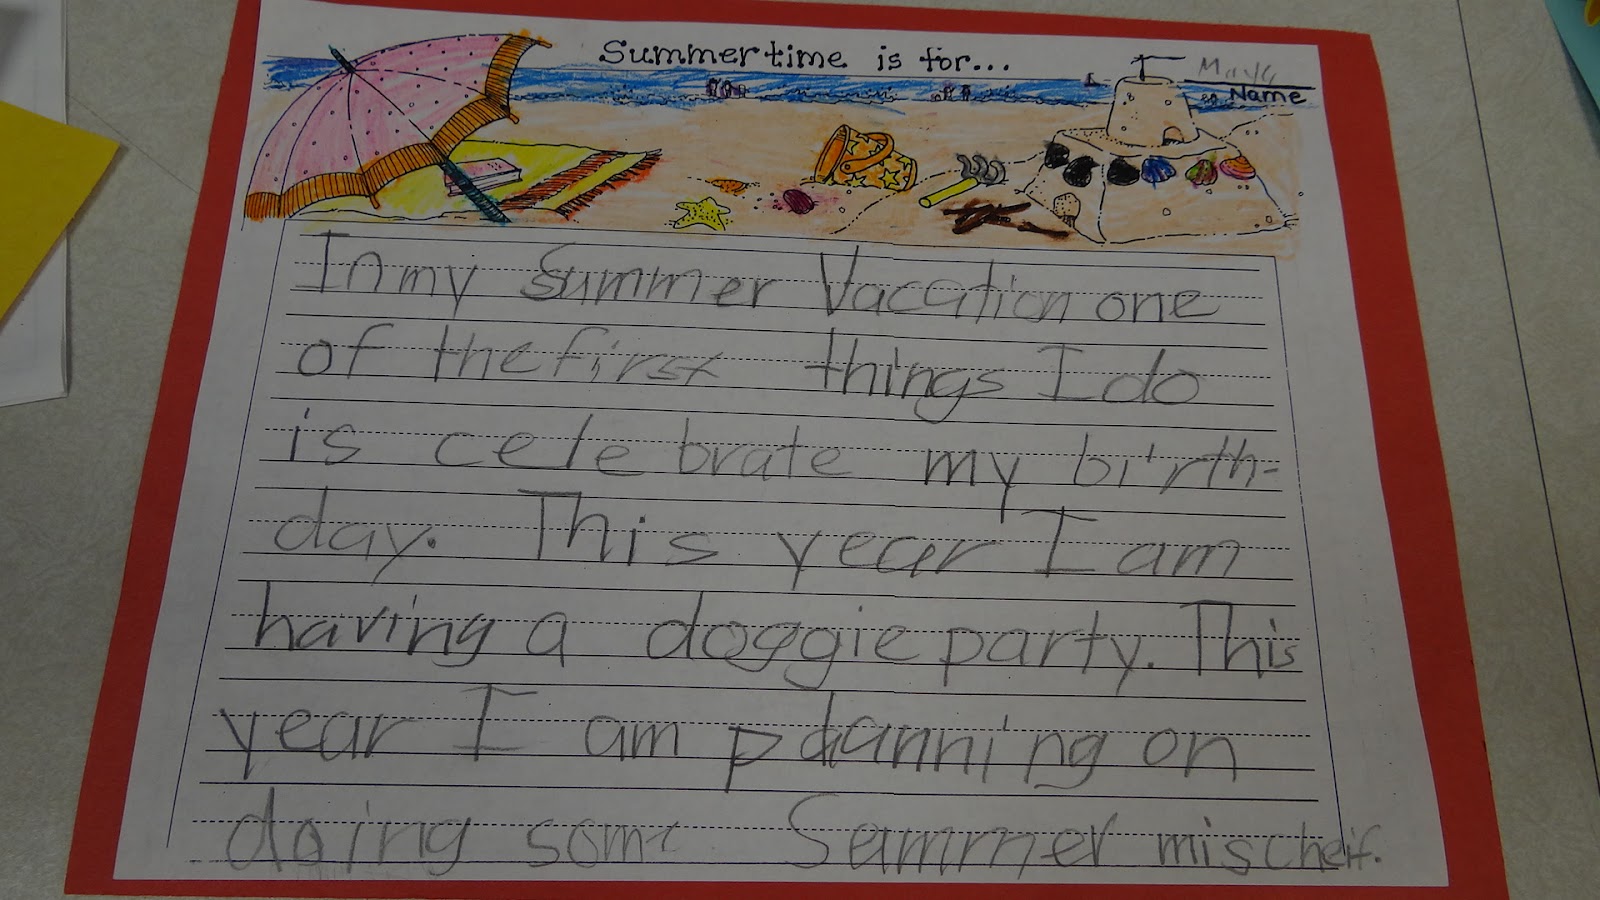 Summer holiday essay for kids